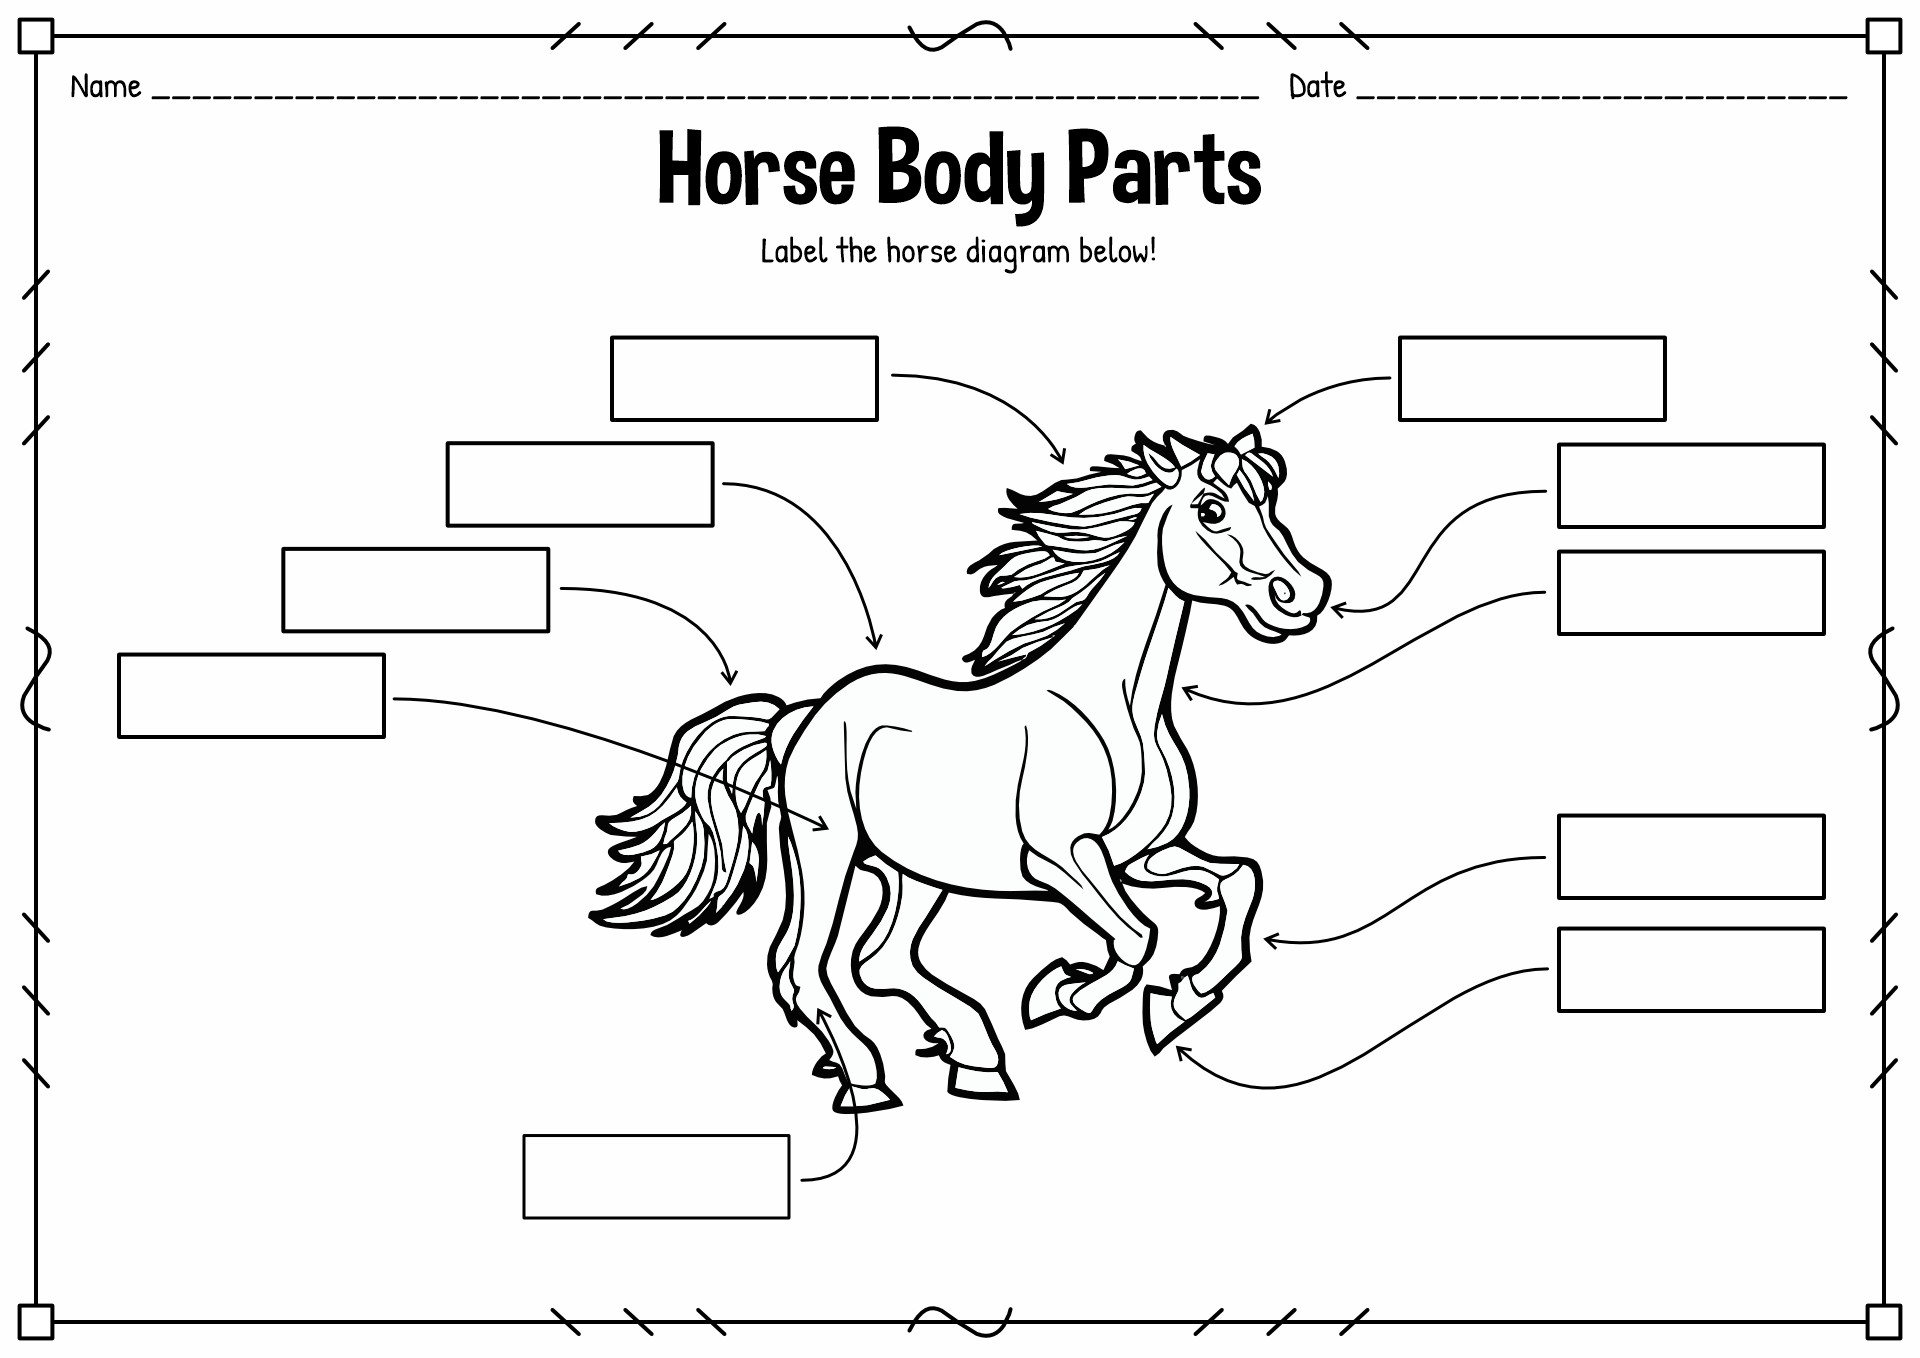 Blank Diagram of a Horse Body Parts Image